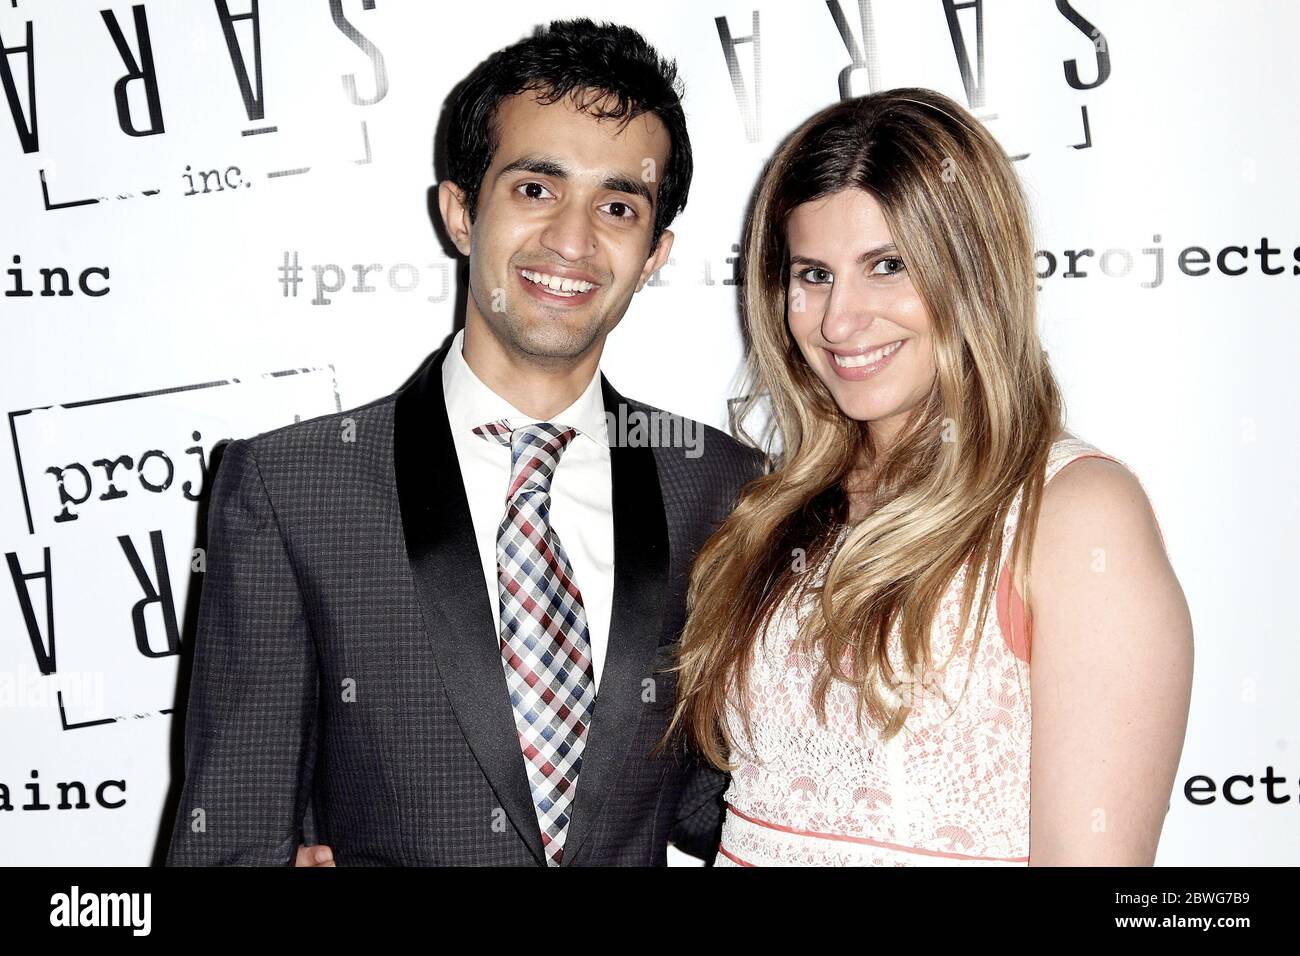 New York, NY, USA. 11 June, 2015. Project Sara Inc. Co-Founder, Viraj Borkar, Associate Producer at NBC Universal's Bravo TV, Chanel Omari at the Launch Of Dining Reconstructed: An Off Menu Experience at The Starrett Leigh Building. Credit: Steve Mack/Alamy Stock Photo